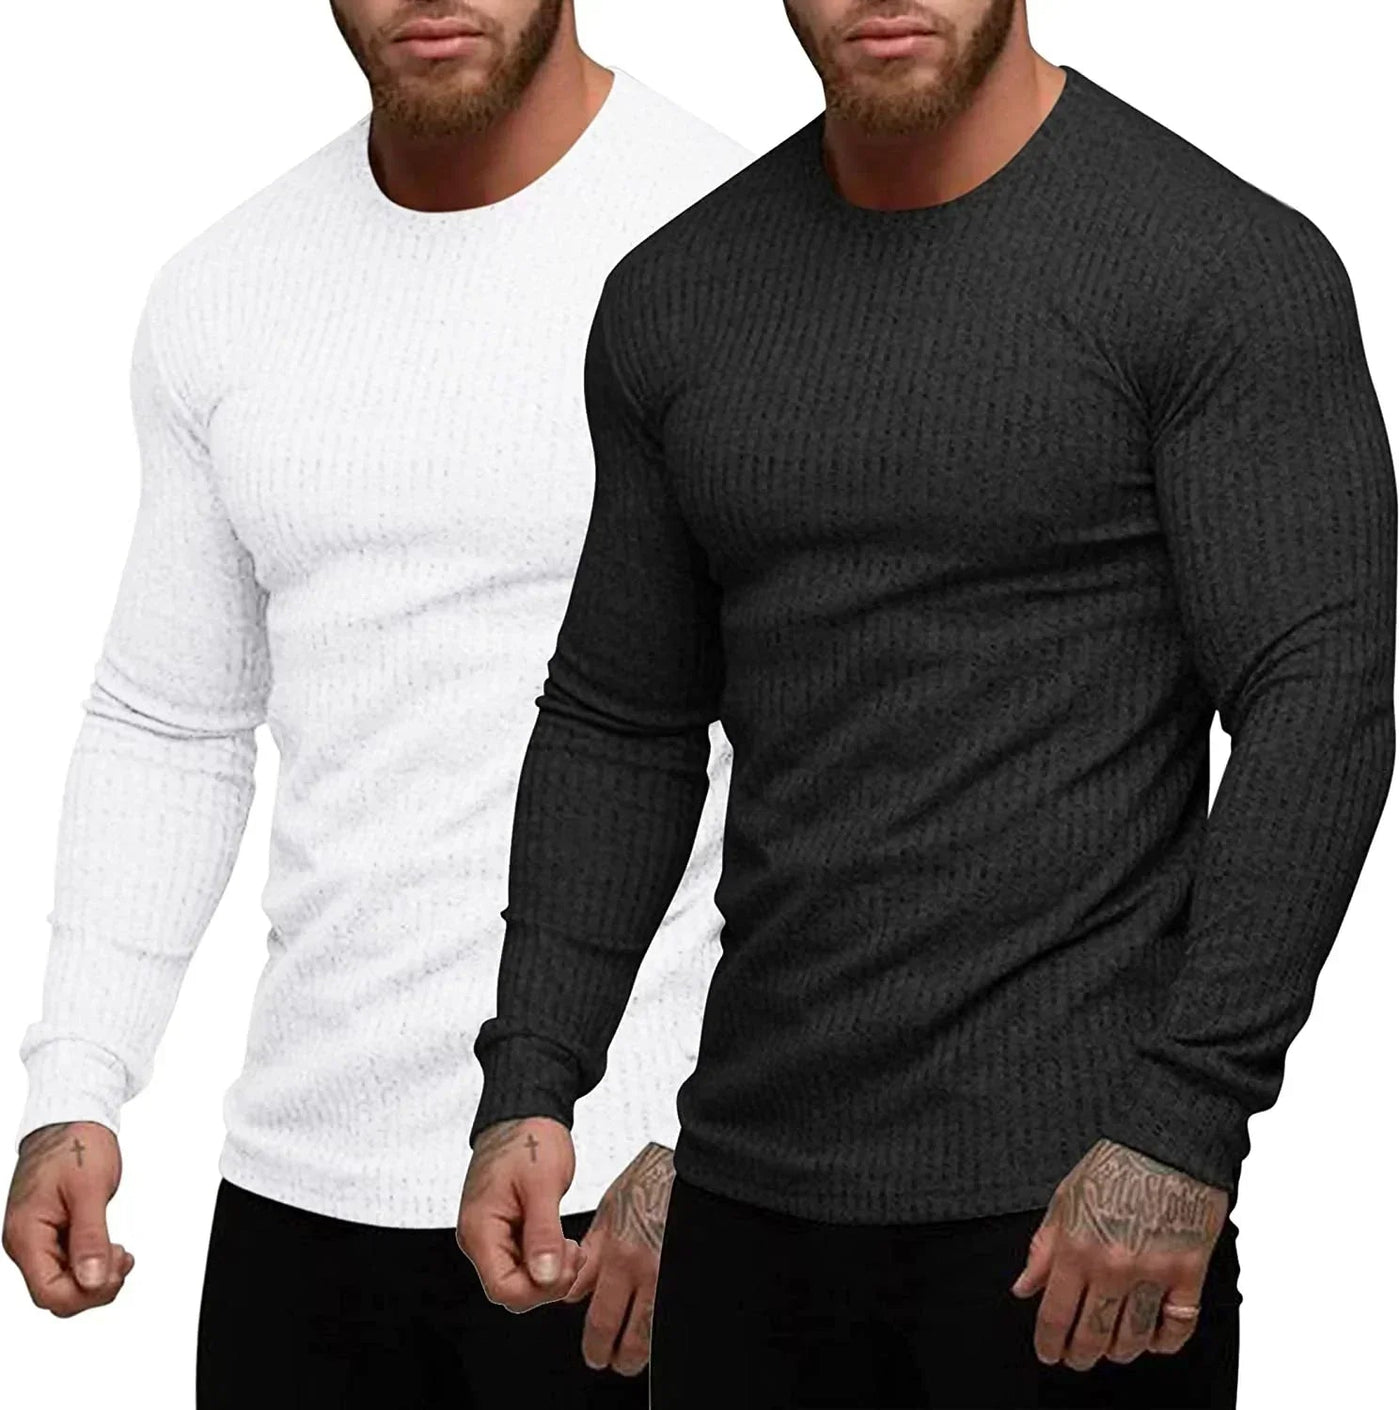 2-Pack Stretch Gym Bodybuilding T-Shirt (US Only) T-Shirt COOFANDY Store Black/White S 